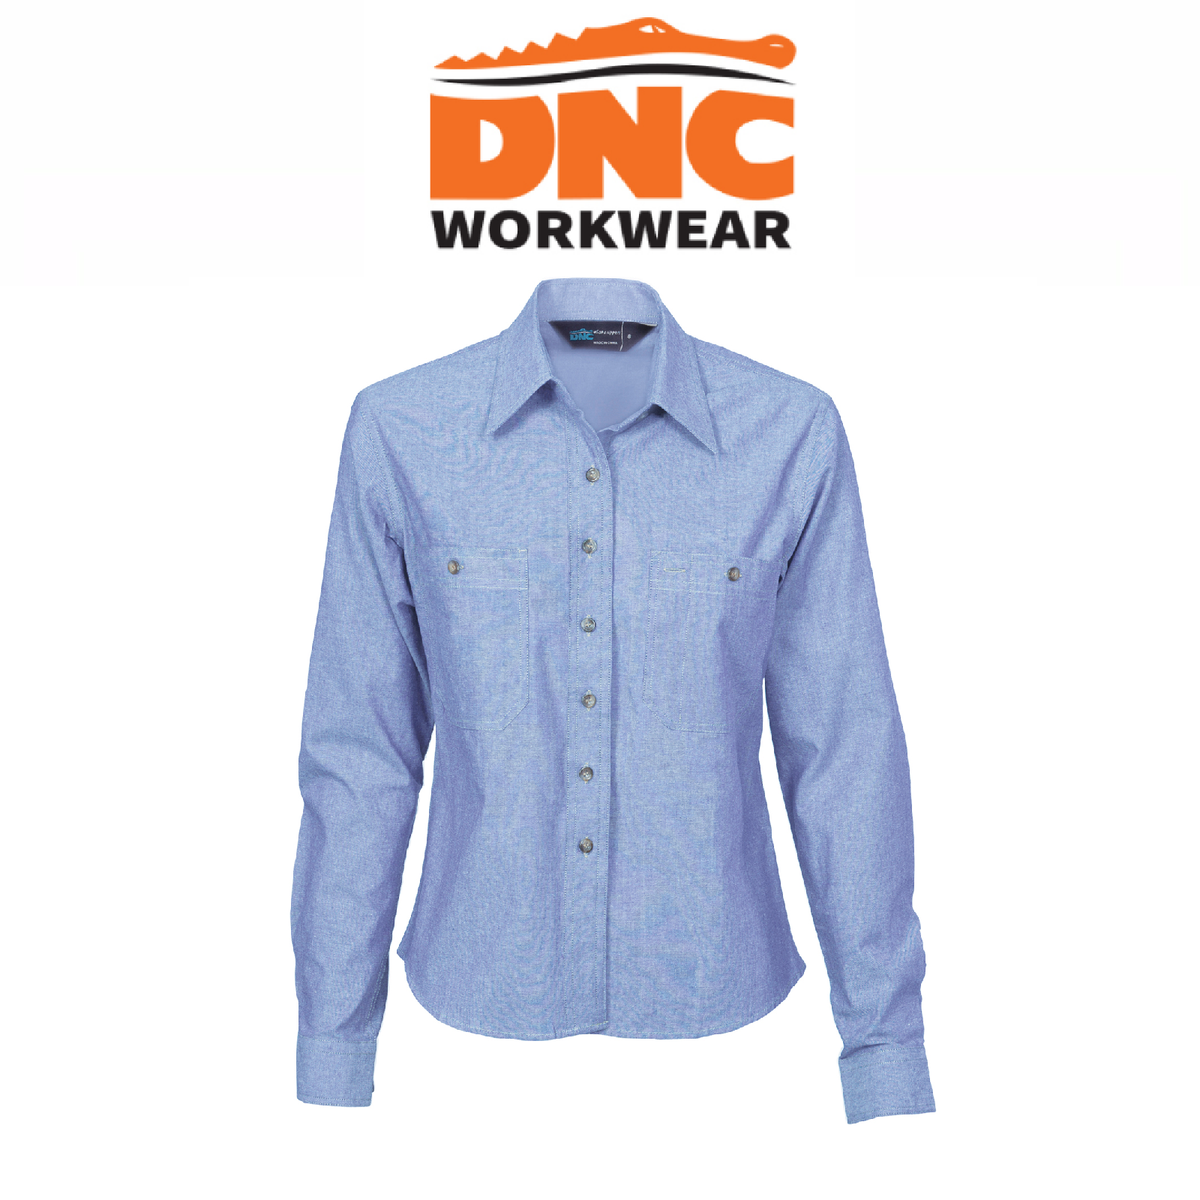 DNC Workwear Womens Ladies Cotton Chambray Shirt Long Sleeve Casual 4106